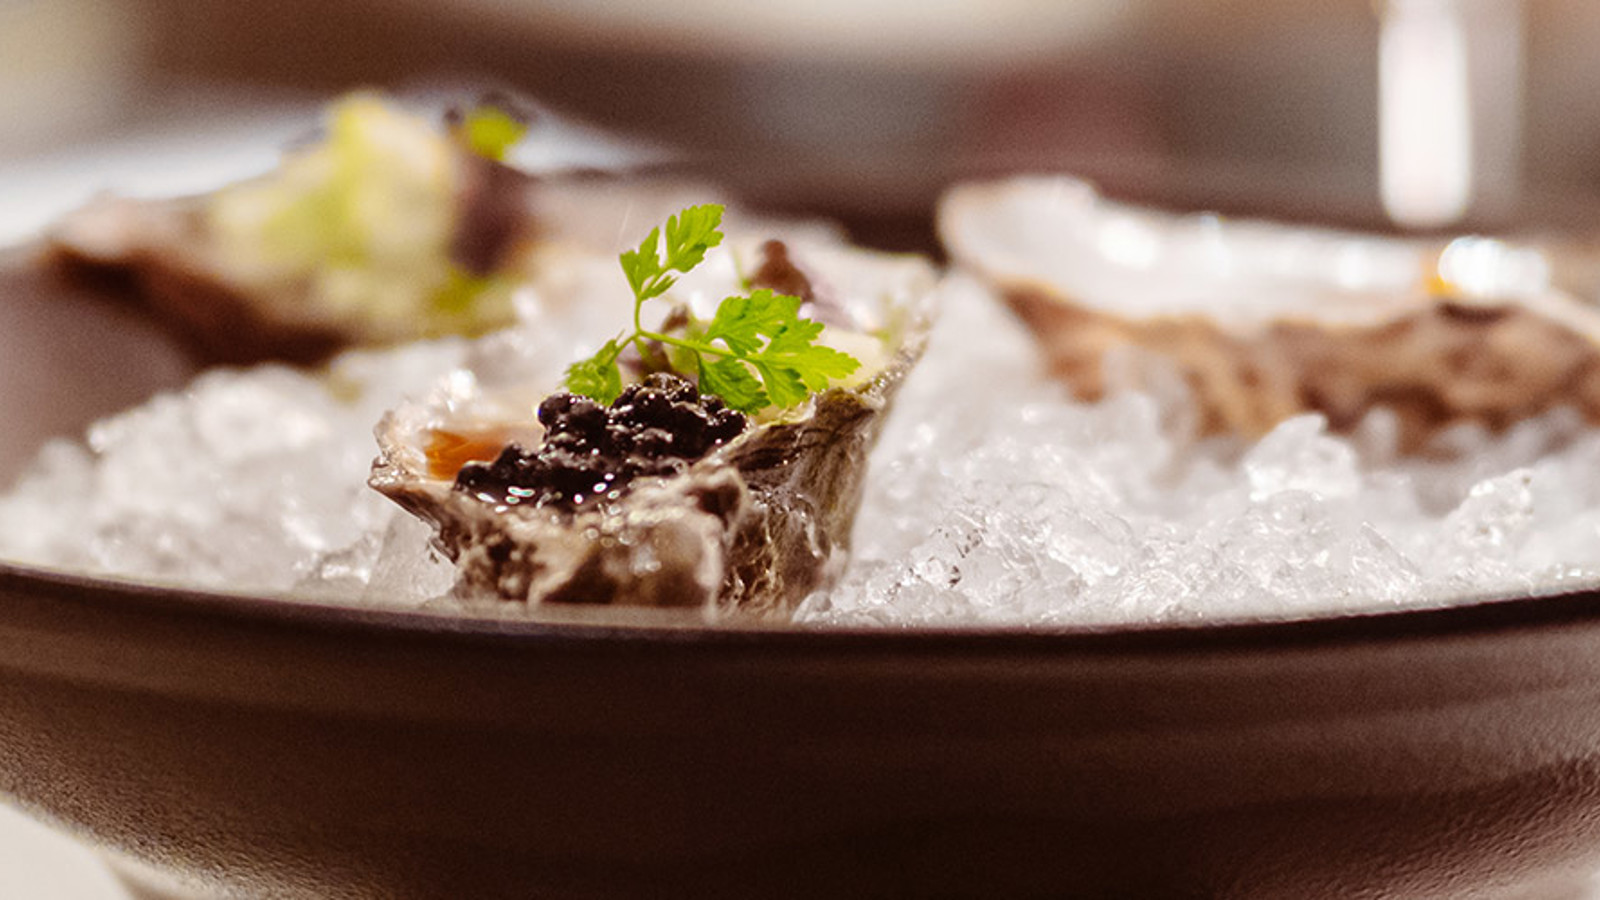 Oysters served on a dish with crushed ice